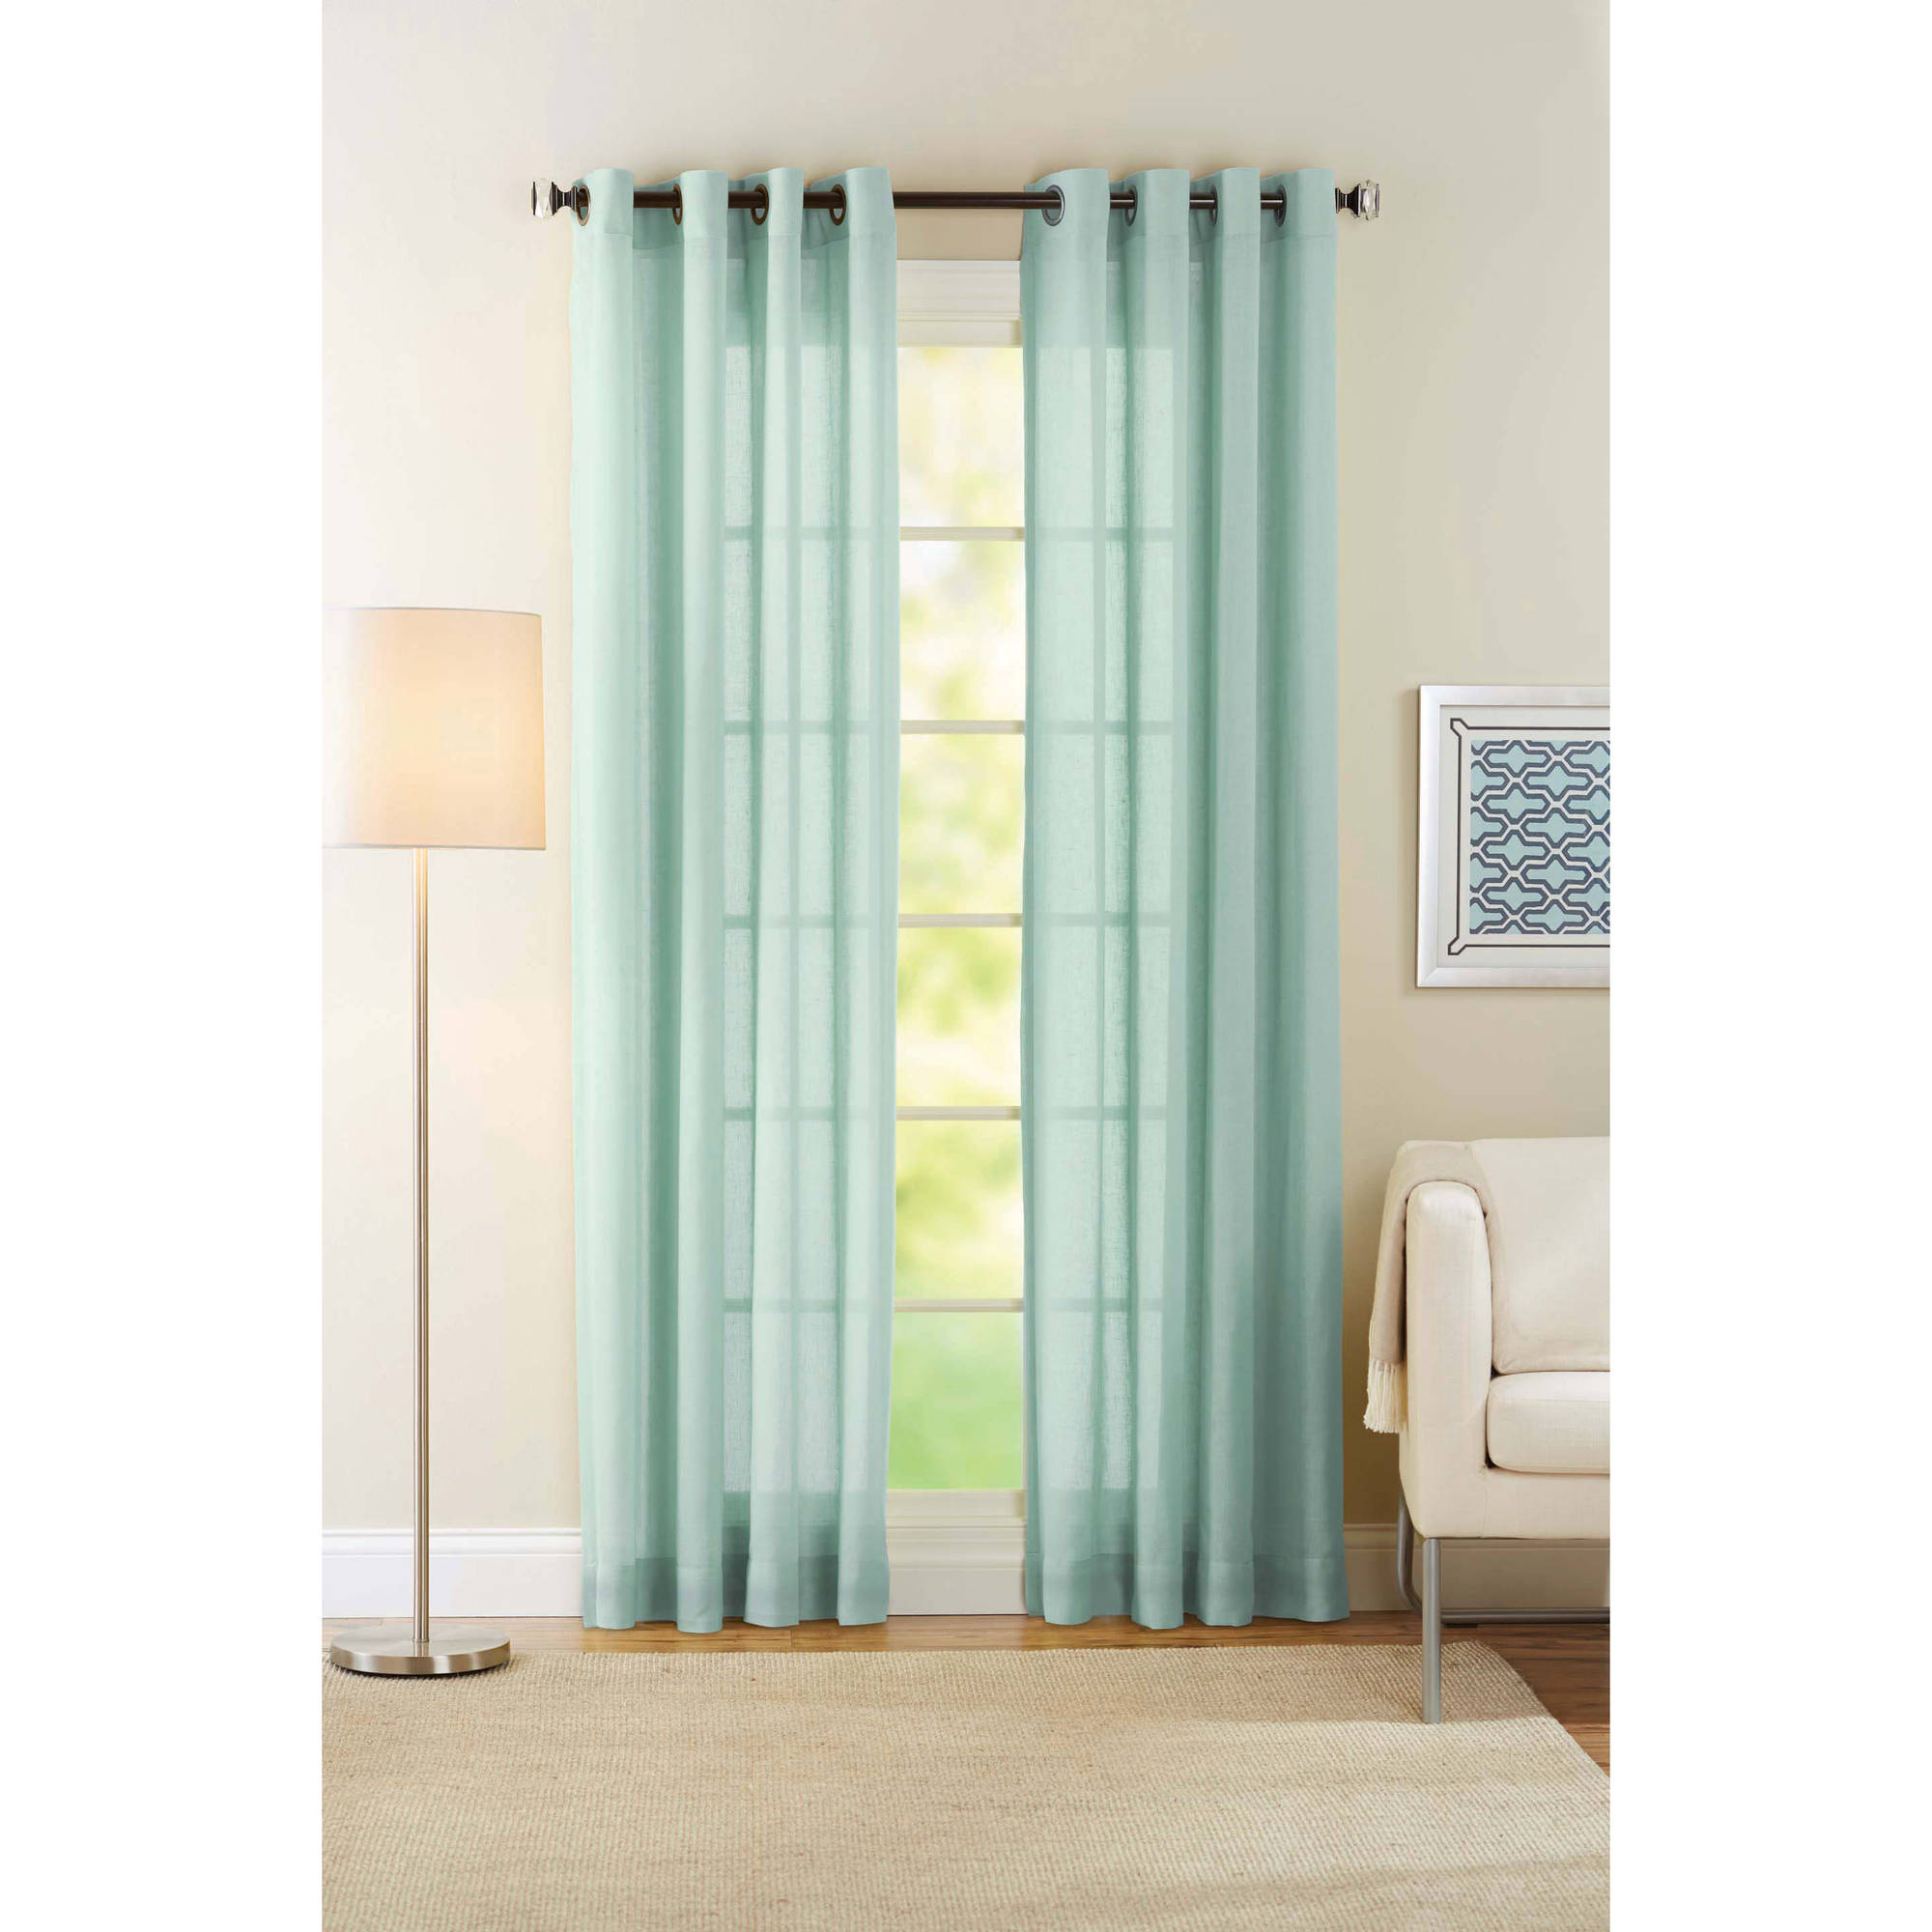 Sheer curtains- perfect for any window